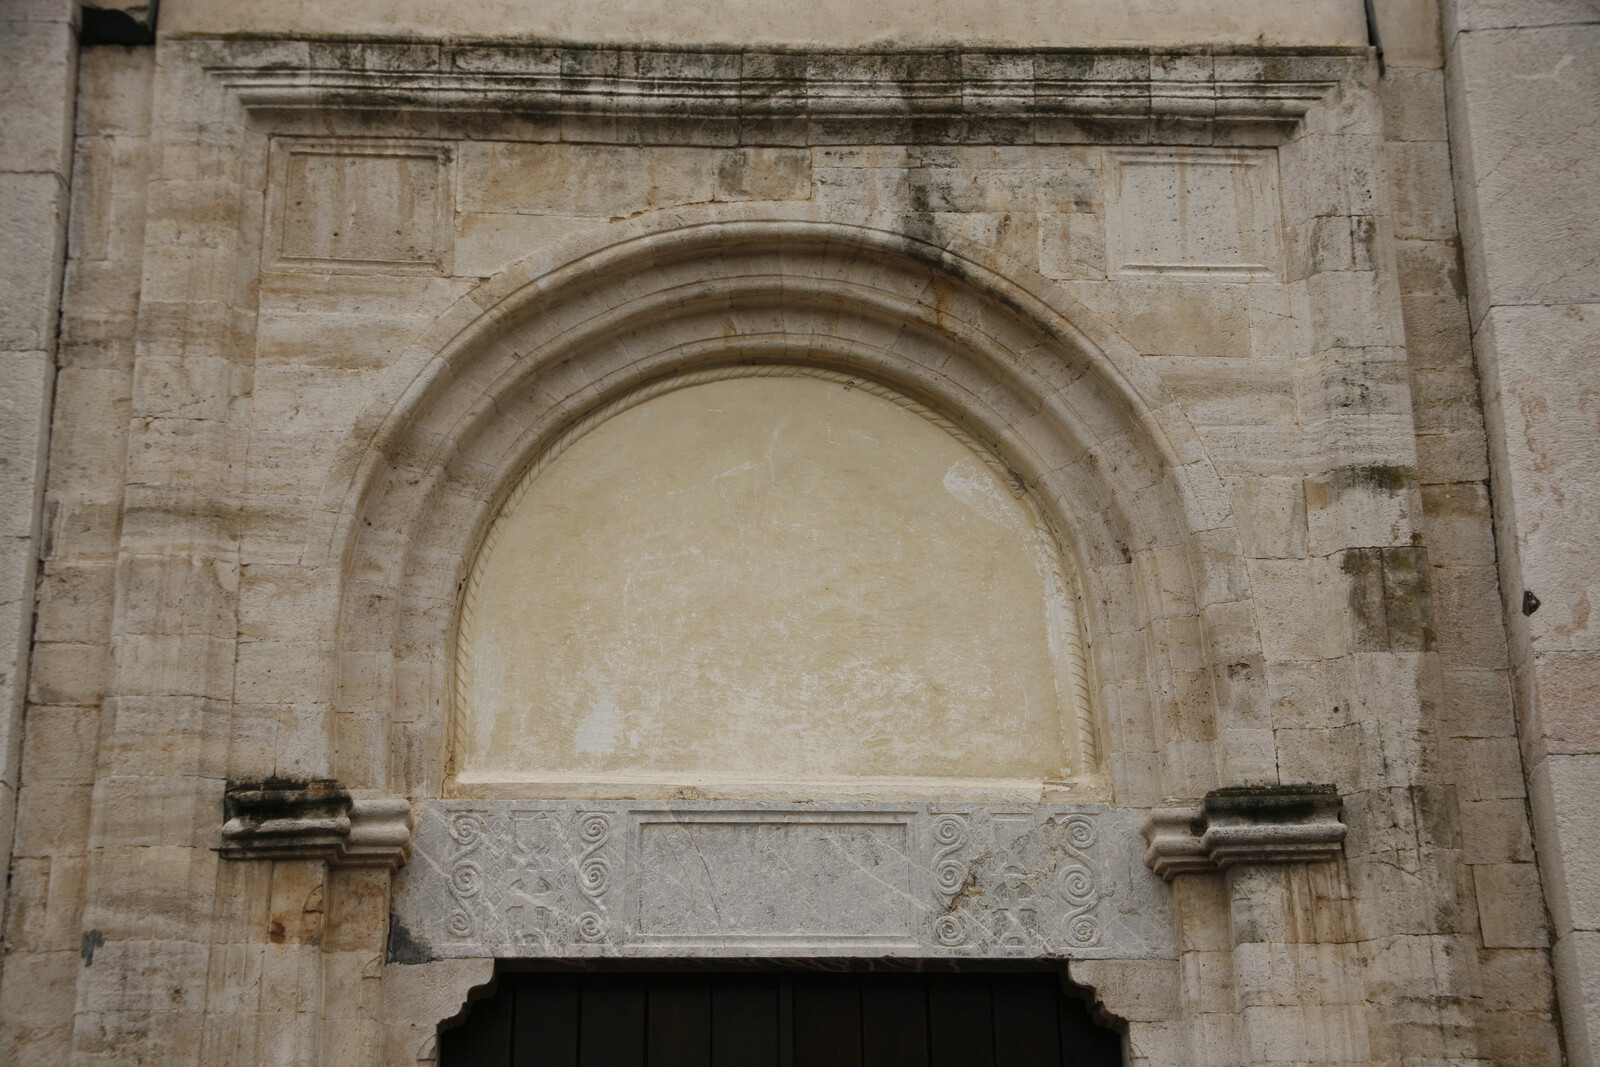 Architrave and lunette of the western portal of church